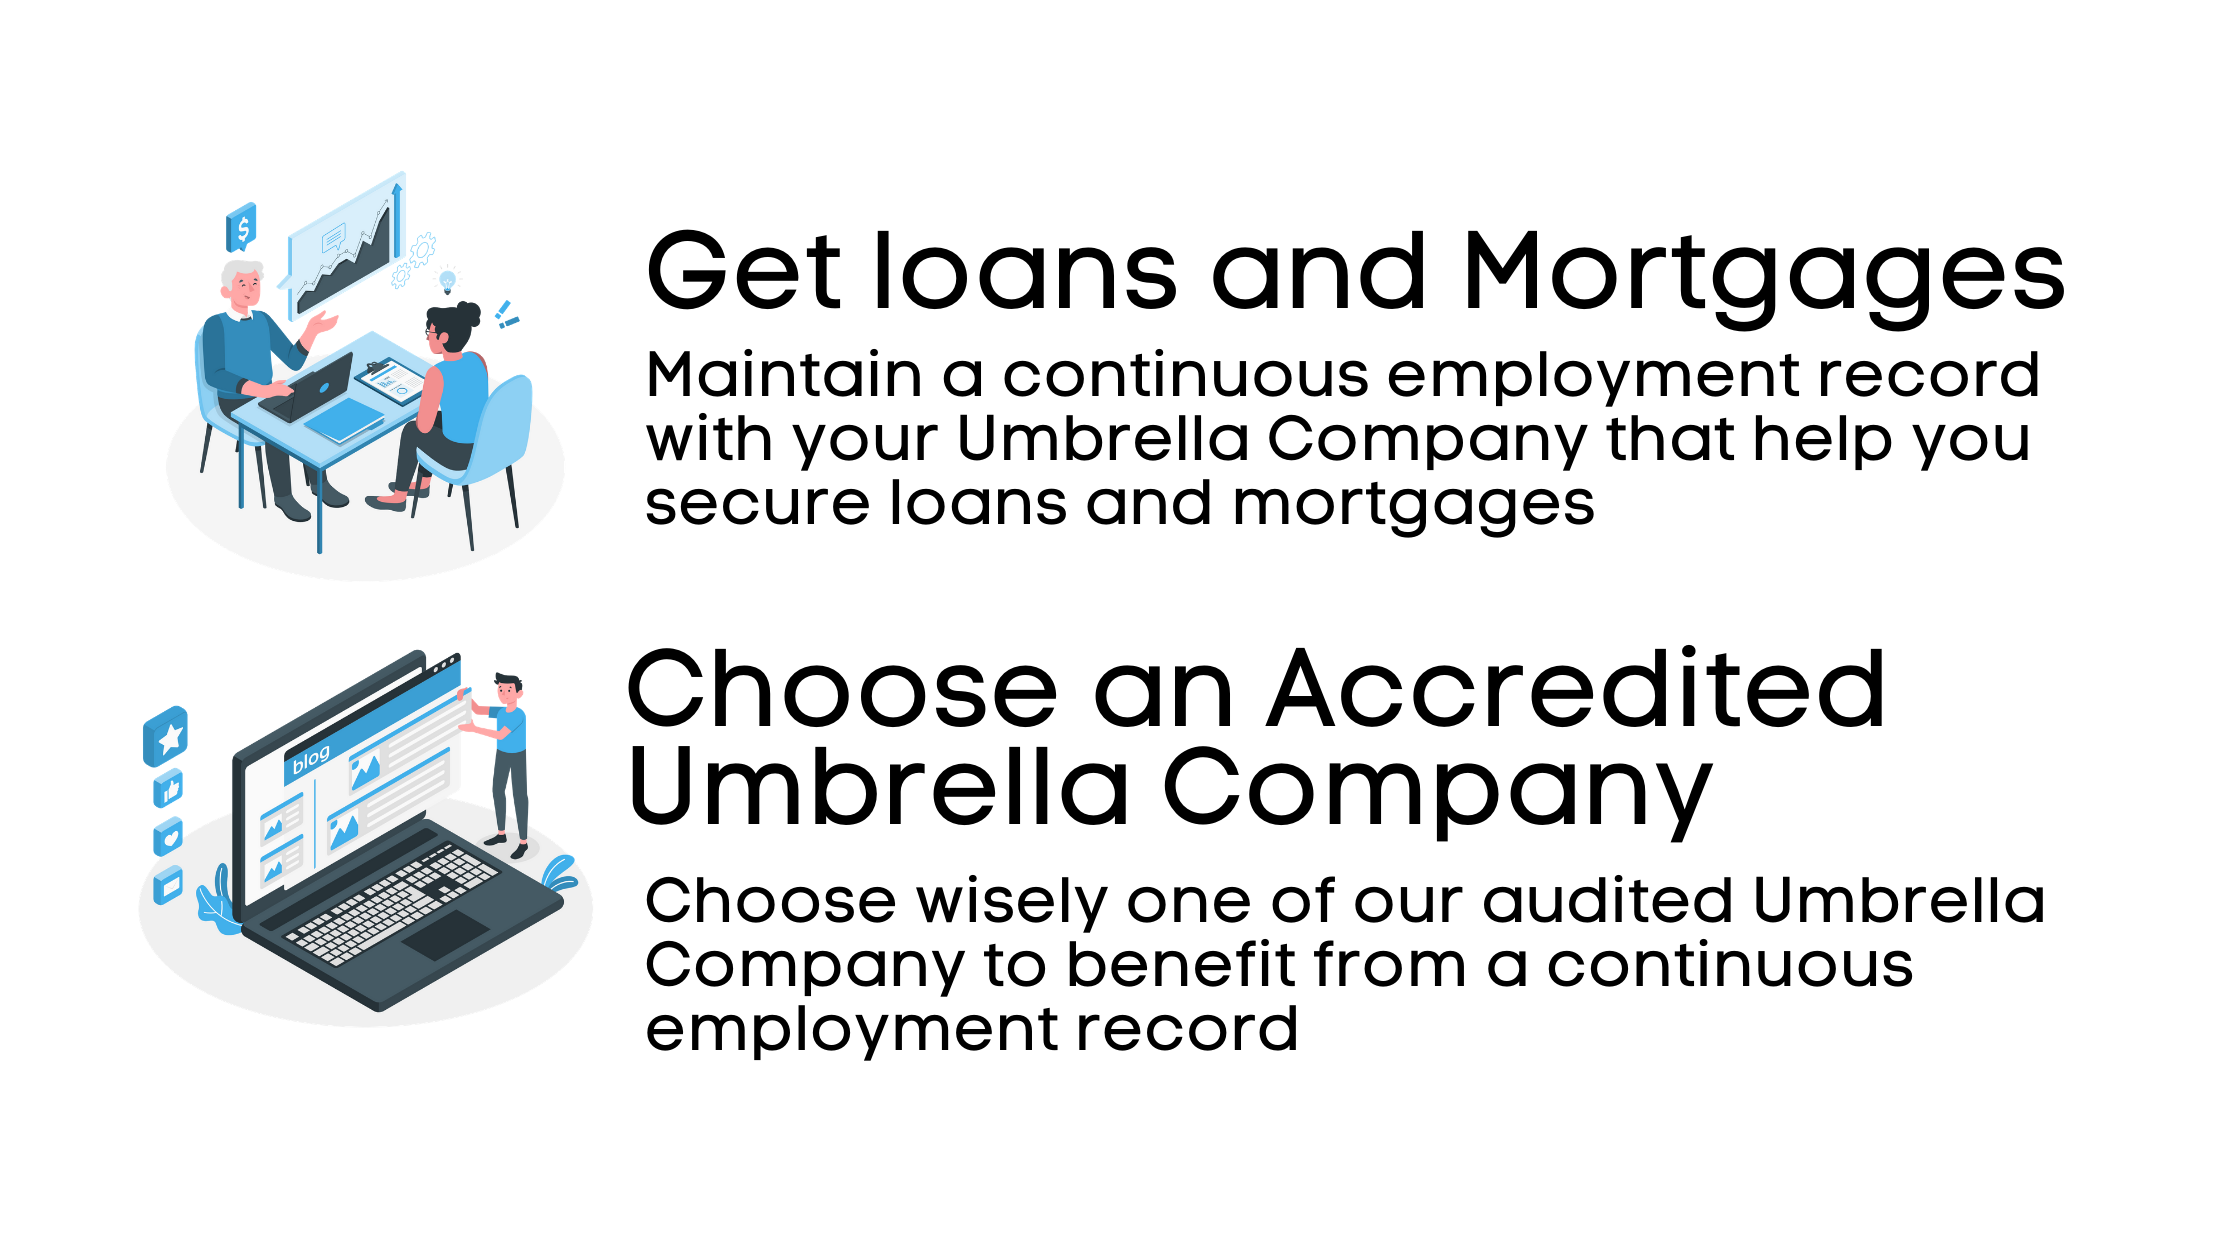 Umbrella Companies - Help you securing loans and mortgages